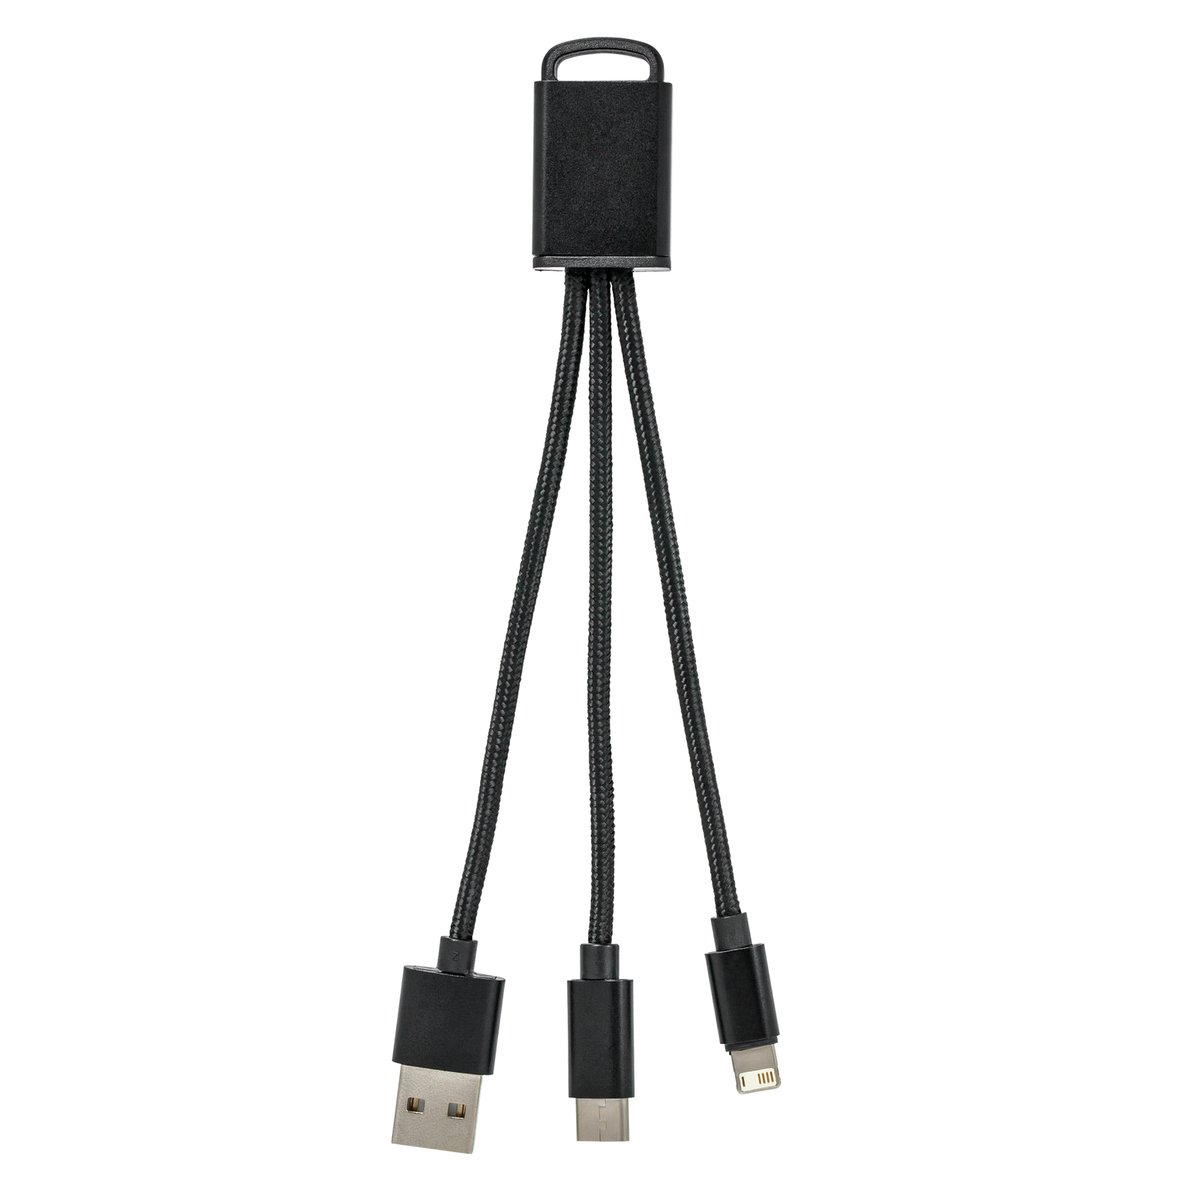 Charging cable with 3-in-1 REEVES-MONTIJA black